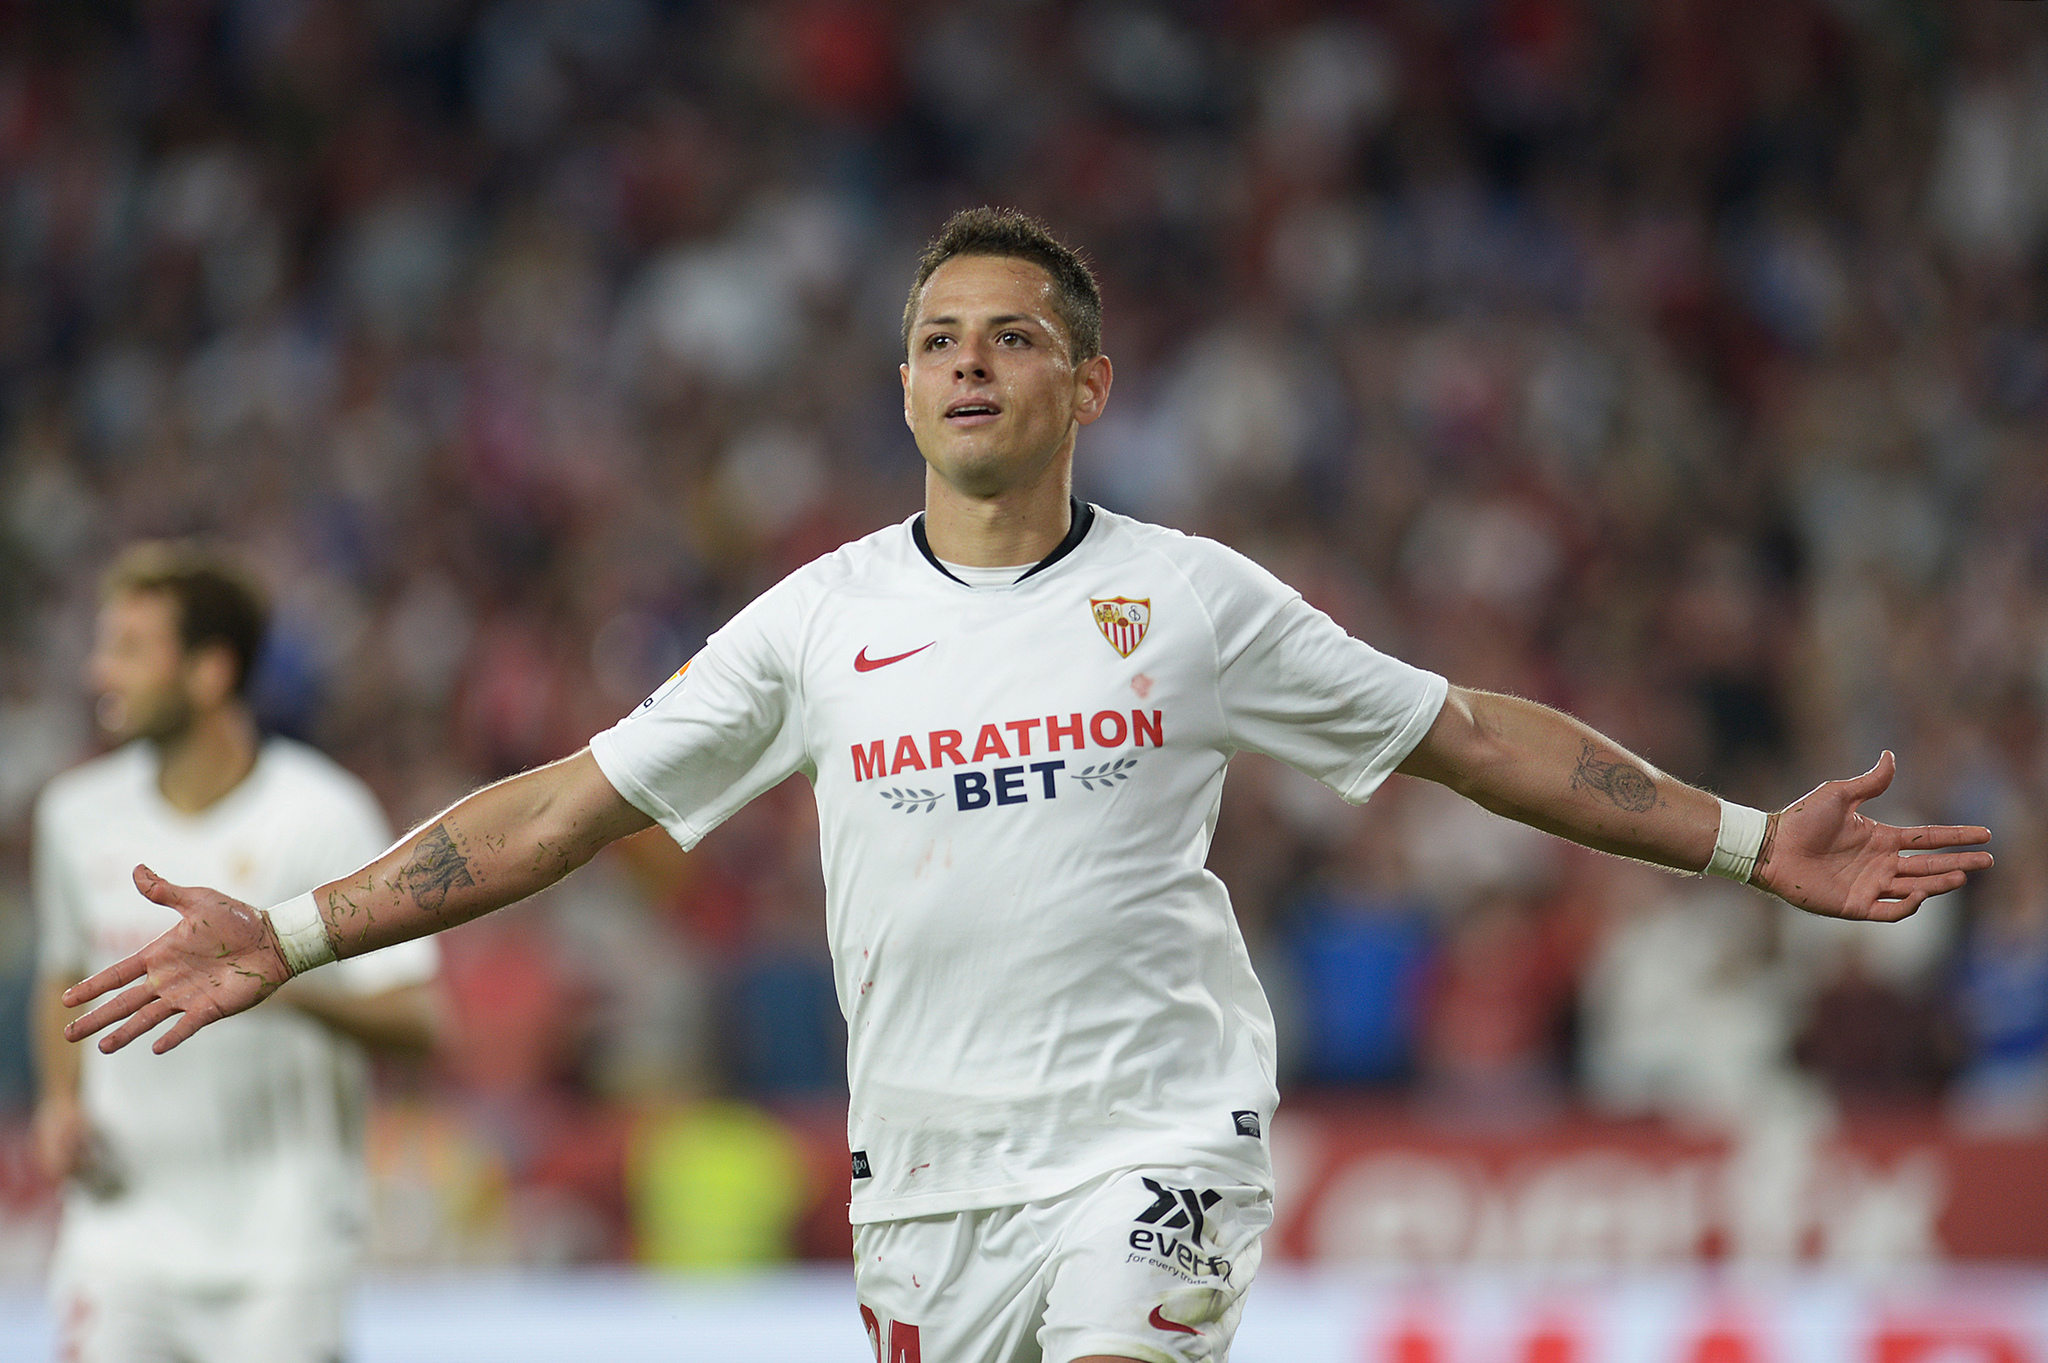 (FILES) In this file photo taken on October 27, 2019 Sevillas Mexican forward <HIT>Chicharito</HIT> celebrates after scoring a goal during the Spanish league football match between Sevilla FC and Getafe CF at the Ramon Sanchez Pizjuan stadium in Seville. - The Los Angeles Galaxy have signed Mexico striker Javier "<HIT>Chicharito</HIT>" Hernandez from Sevilla and will make him the highest-paid player in Major League Soccer, Sports Illustrated reported January 17, 2020. Galaxy will be counting on <HIT>Chicharito</HIT>, who is Mexicos all-time leading goal-scorer, to fill the star-power and scoring void left by the departure of Zlatan Ibrahimovic, the Swedish star who returned to AC Milan in December. (Photo by CRISTINA QUICLER / AFP)